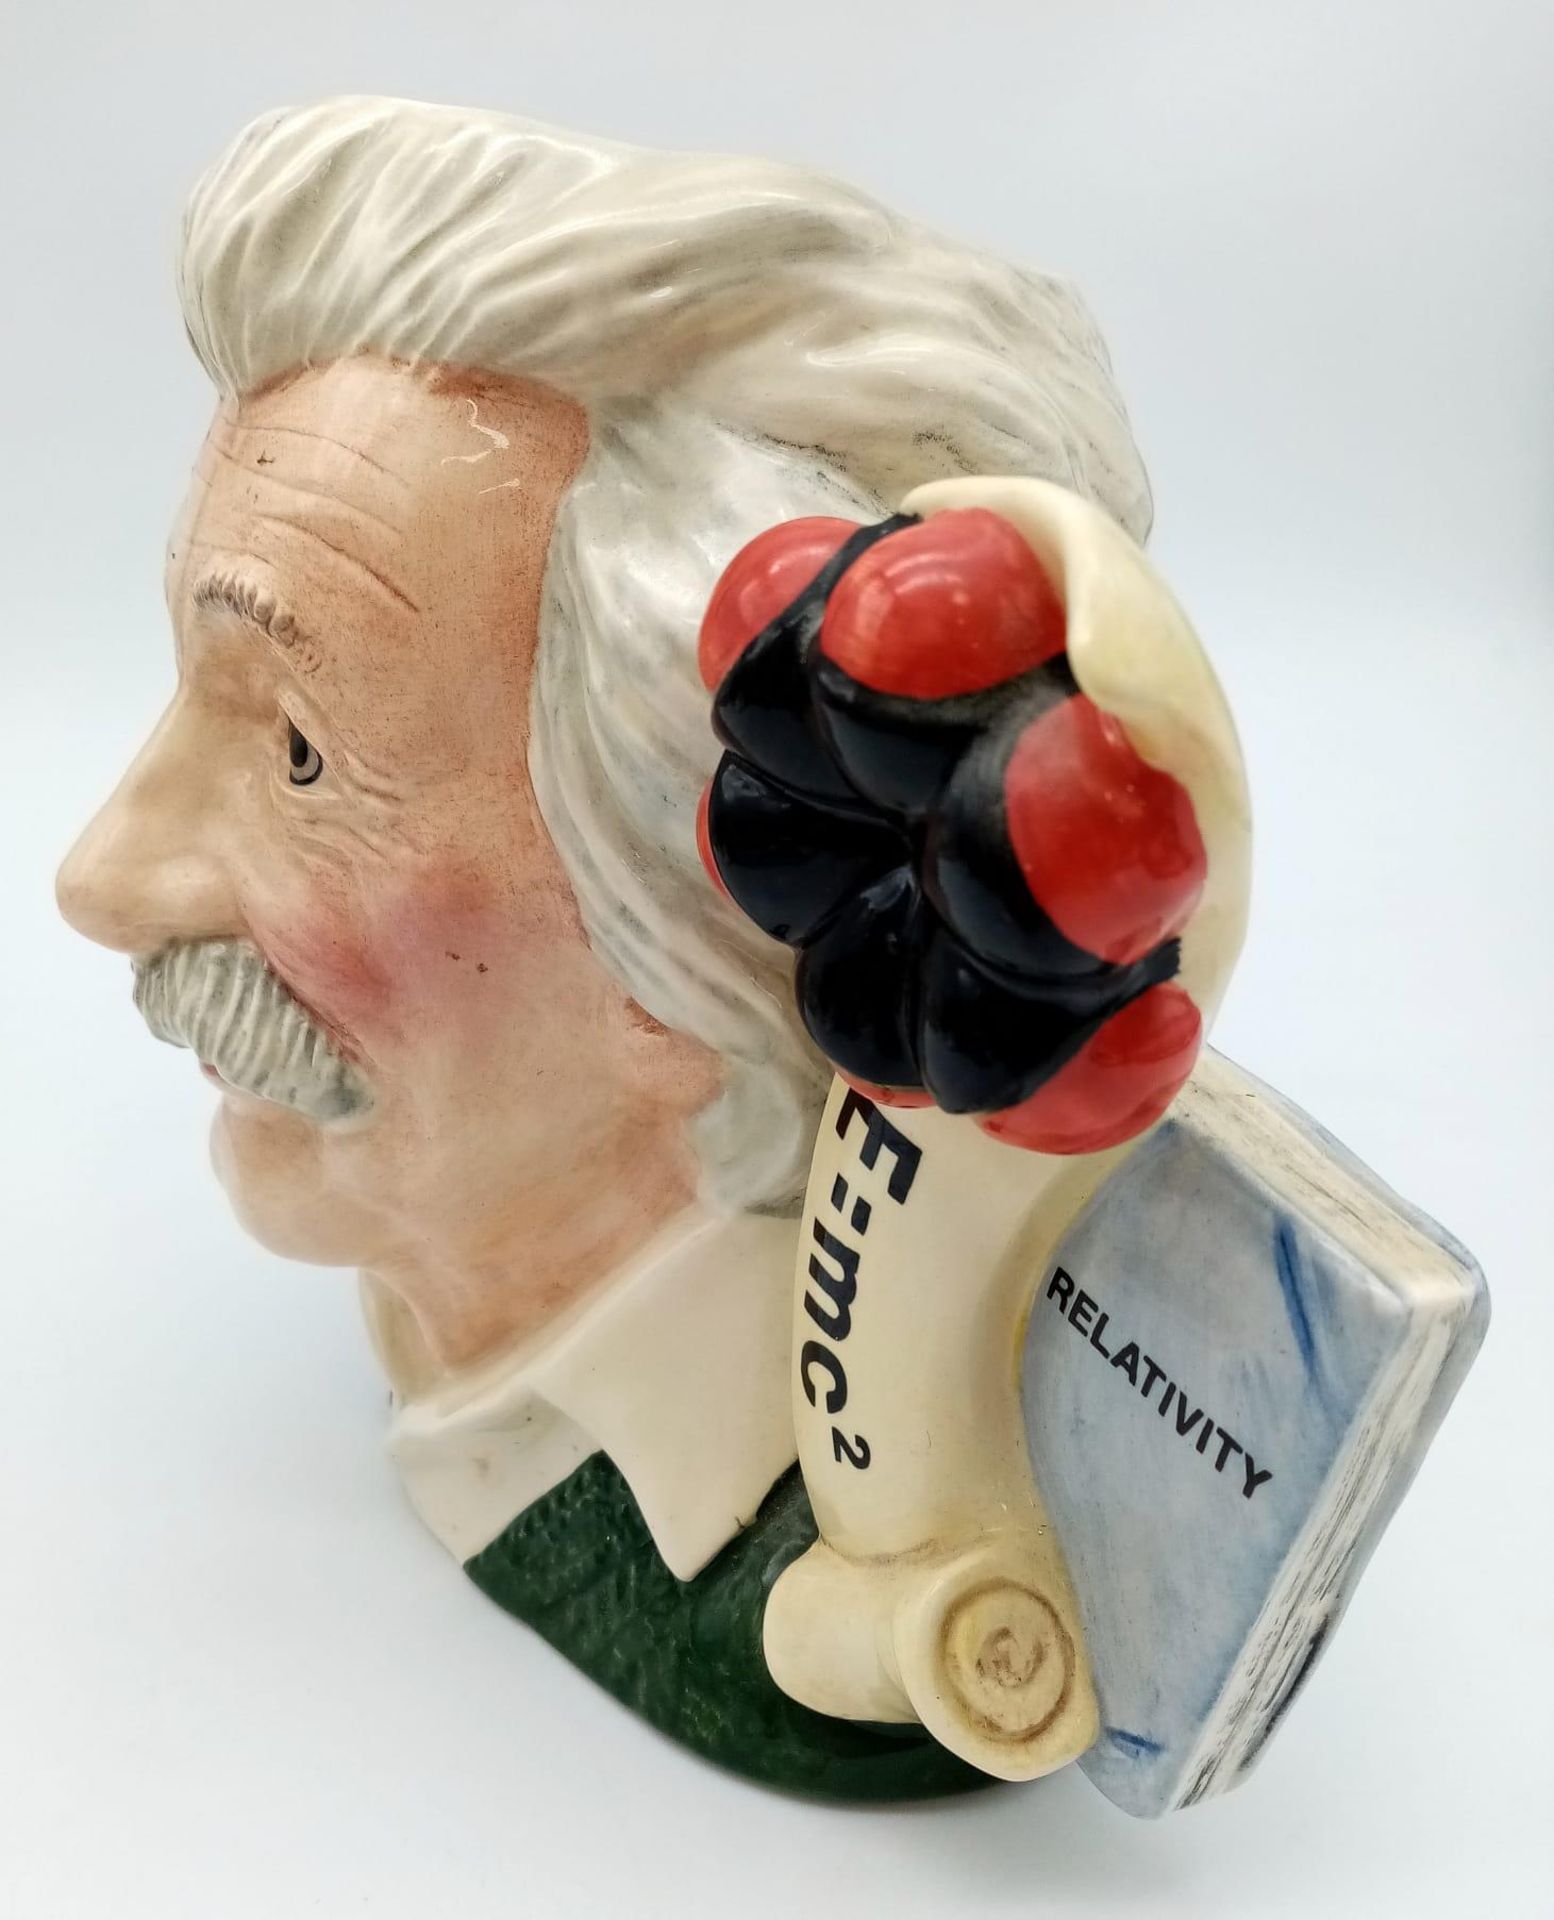 A HAND MADE AND HAND DECORATED "ALBERT EINSTEIN" TOBY JUG WITH THE THEORY OF RELATIVITY HANDLE - Image 2 of 7